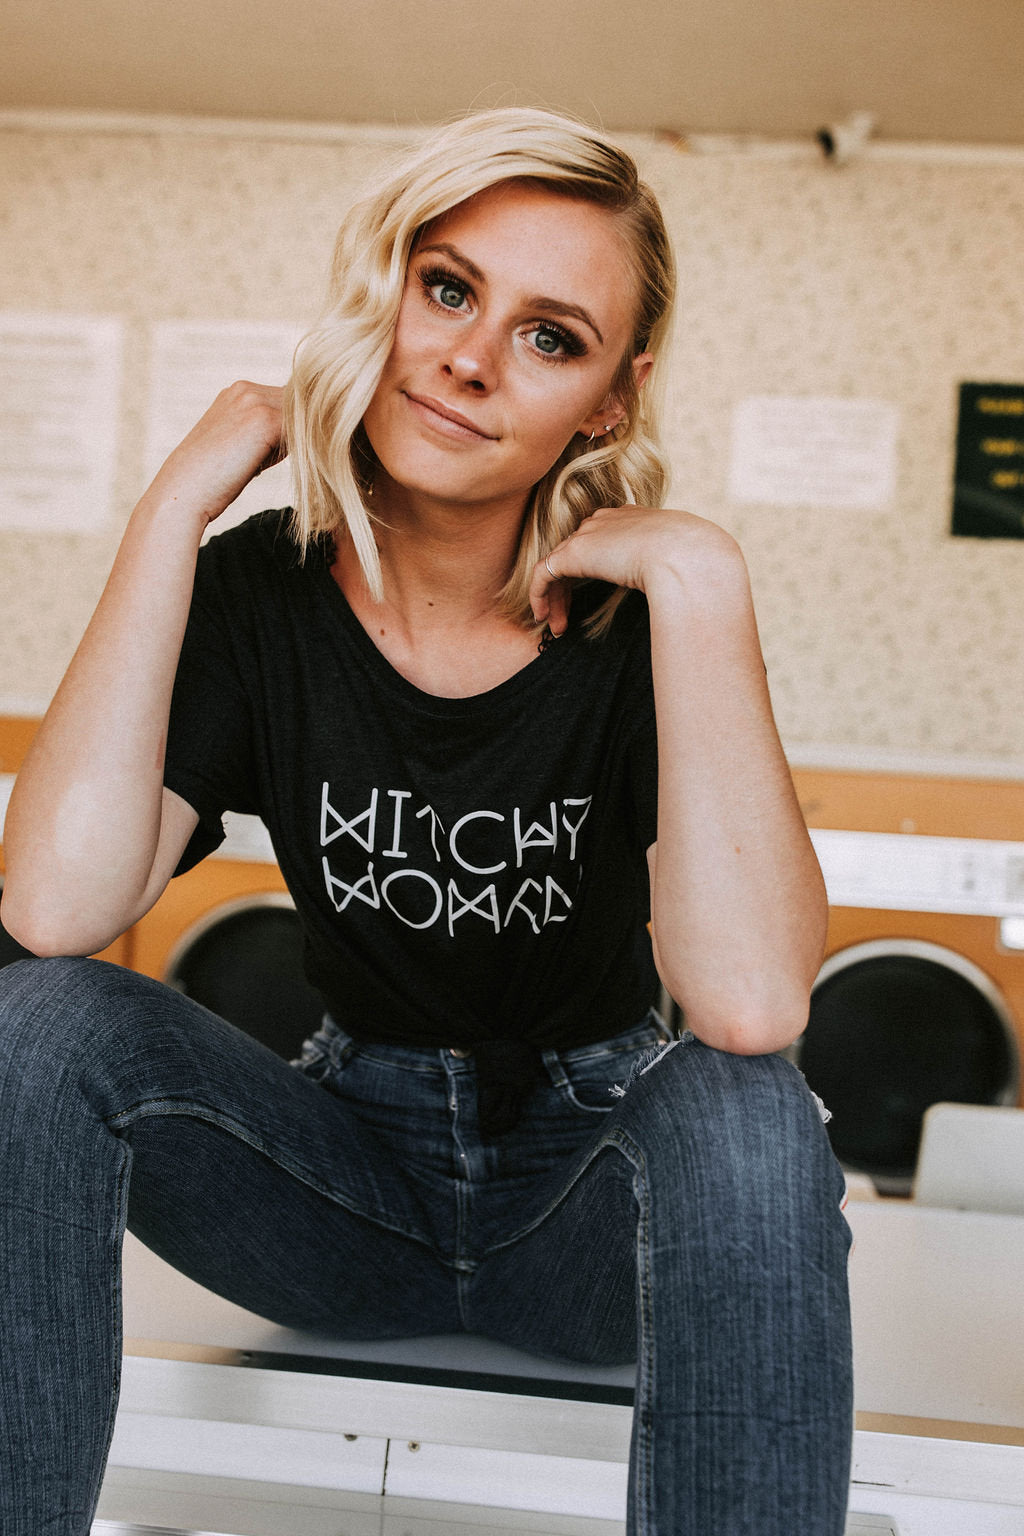 WITCHY WOMAN Tshirt, Witchy Woman Tee, Witchy Tee, Witchy Woman Tshirt, Witchy Shirts, Stevie Nicks Tshirts